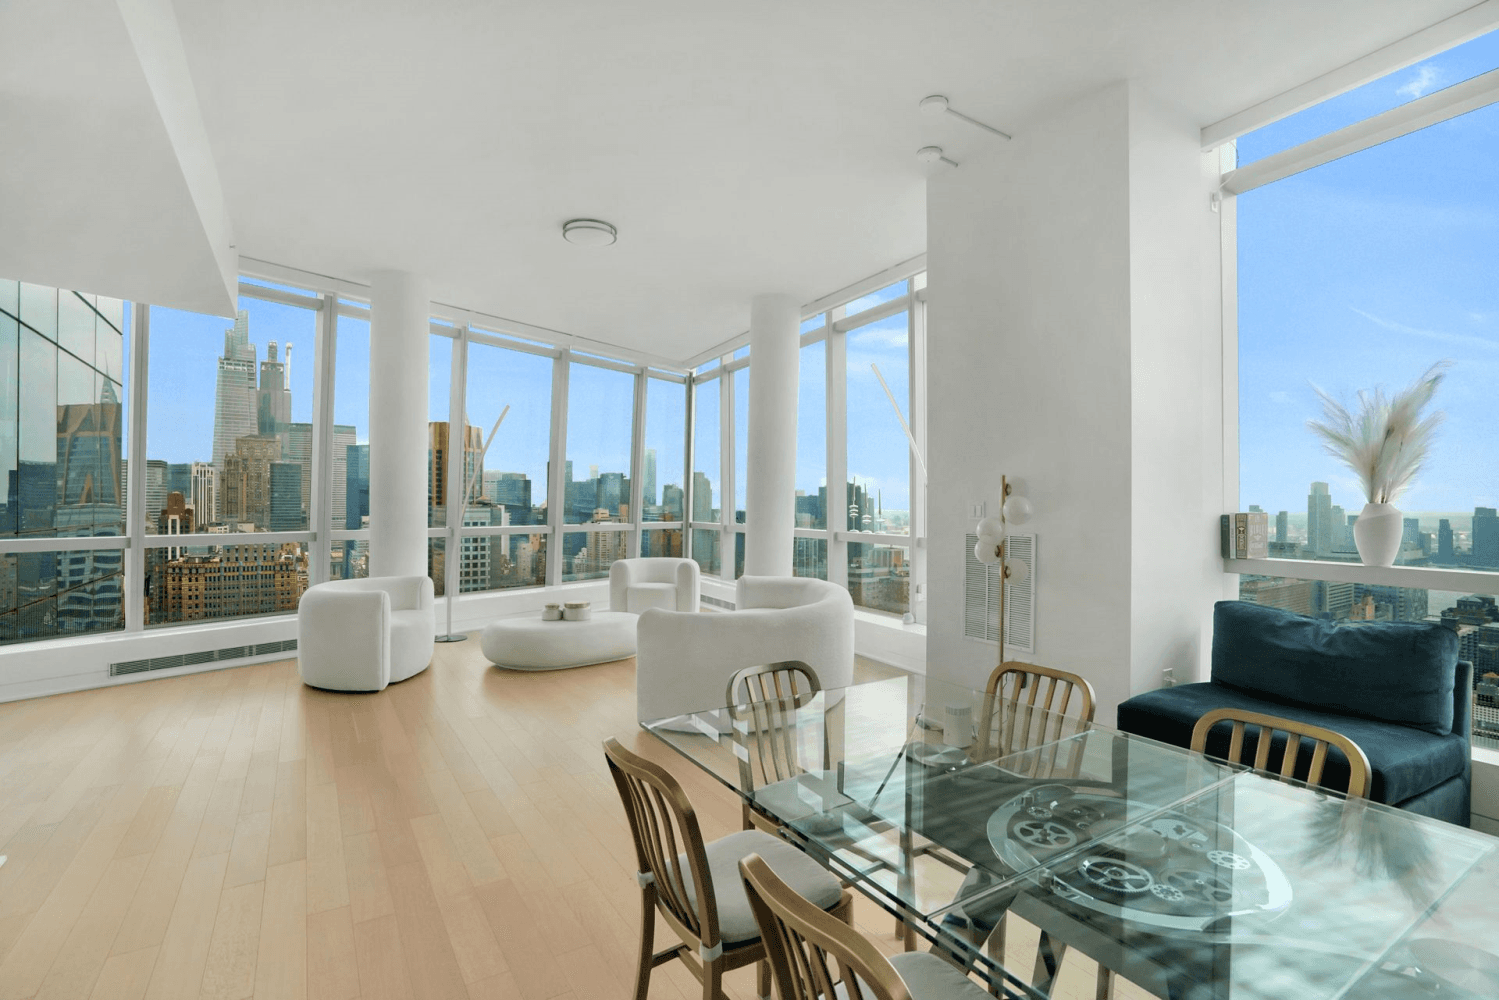 Introducing Penthouse ONE at the world renowned 400 Park Avenue South.